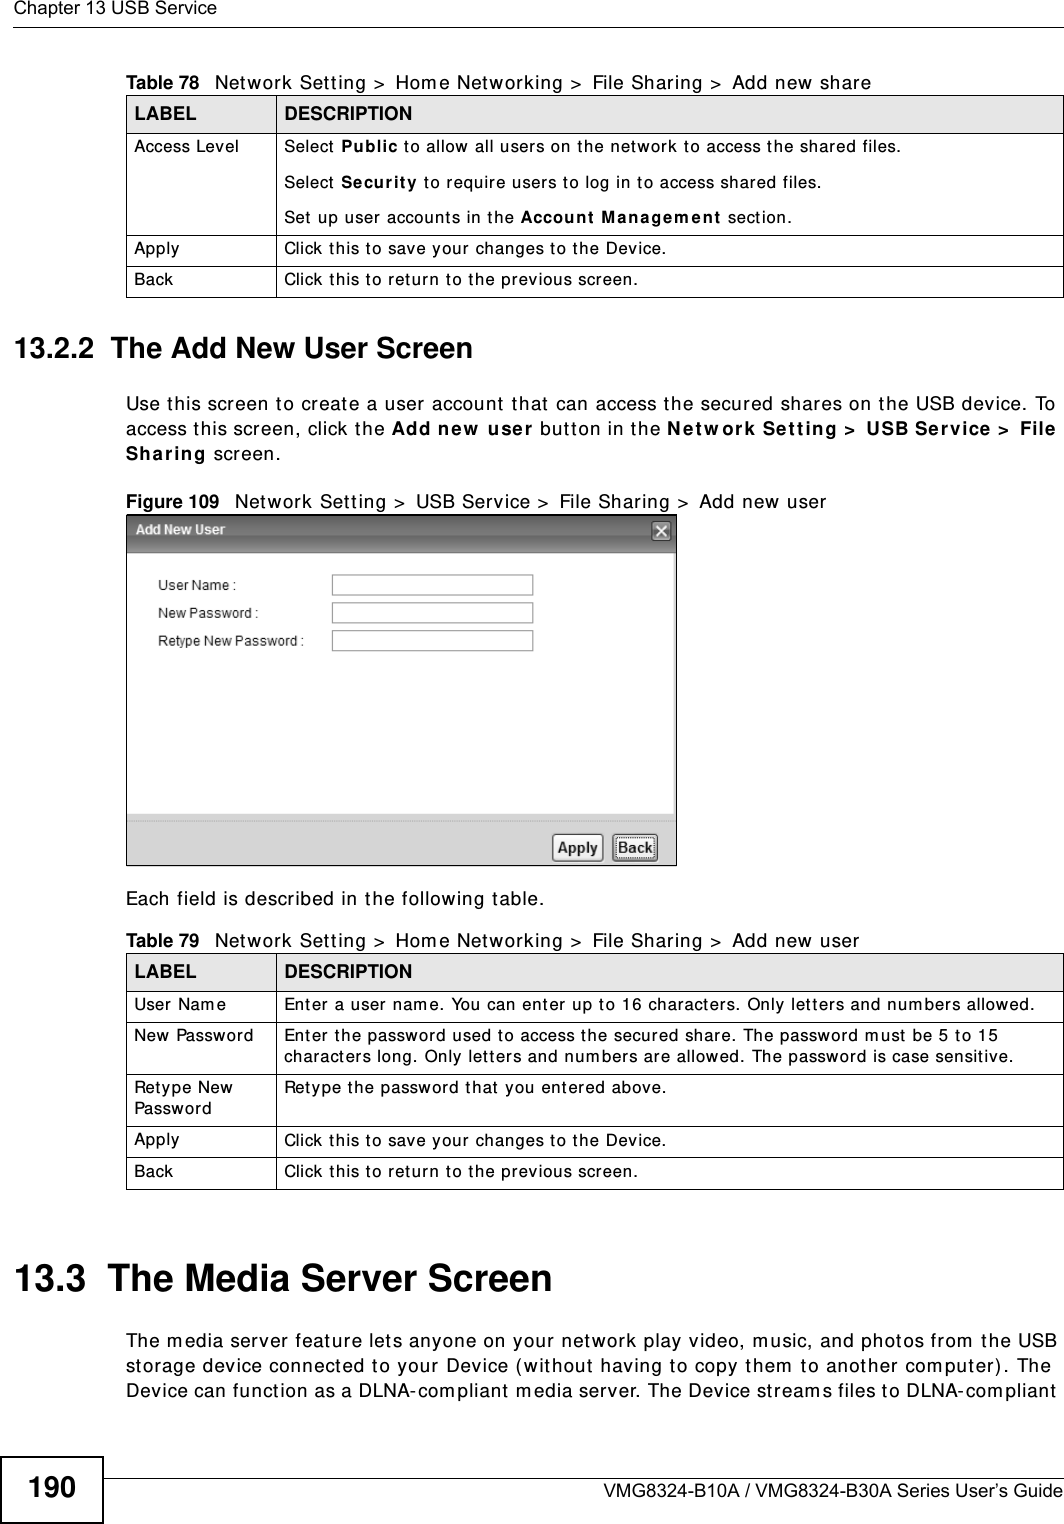 Chapter 13 USB ServiceVMG8324-B10A / VMG8324-B30A Series User’s Guide19013.2.2  The Add New User ScreenUse t his screen t o create a user account  that can access t he secured shares on t he USB device. To access t his screen, click t he Add new  use r  but t on in t he N et w or k  Se t t ing &gt;  USB Service &gt;  File  Sha r in g screen.Figure 109   Network Sett ing &gt;  USB Service &gt;  File Sharing &gt;  Add new  userEach field is described in the following t able.13.3  The Media Server ScreenThe m edia server feat ure let s anyone on your network play video, m usic, and phot os from  t he USB st orage device connect ed t o your Device ( without having t o copy them  t o another com puter) . The Device can funct ion as a DLNA- com pliant  m edia server. The Device st r eam s files to DLNA- com pliant  Access Level Select  Public t o allow all users on t he net work to access the shared files.Select  Se cu r it y  t o require users t o log in to access shared files.Set  up user accounts in t he Accou nt  M a nagem e nt  sect ion.Apply Click this to save your changes t o t he Device.Back Click t his t o ret urn t o t he previous screen.Table 78   Net work Set t ing &gt;  Hom e Net working &gt;  File Sharing &gt;  Add new shareLABEL DESCRIPTIONTable 79   Net work Set t ing &gt;  Hom e Net working &gt;  File Sharing &gt;  Add new userLABEL DESCRIPTIONUser  Nam e Ent er a user  nam e. You can ent er up to 16 charact ers. Only let t ers and num bers allowed.New  Password Ent er the passwor d used to access the secured share. The password m ust  be 5 to 15 charact ers long. Only let t ers and num bers are allowed. The passw ord is case sensitive.Ret y pe New Passw ordRet ype t he password t hat  you ent ered above.Apply Click this to save your changes t o t he Device.Back Click t his t o ret urn t o t he previous screen.